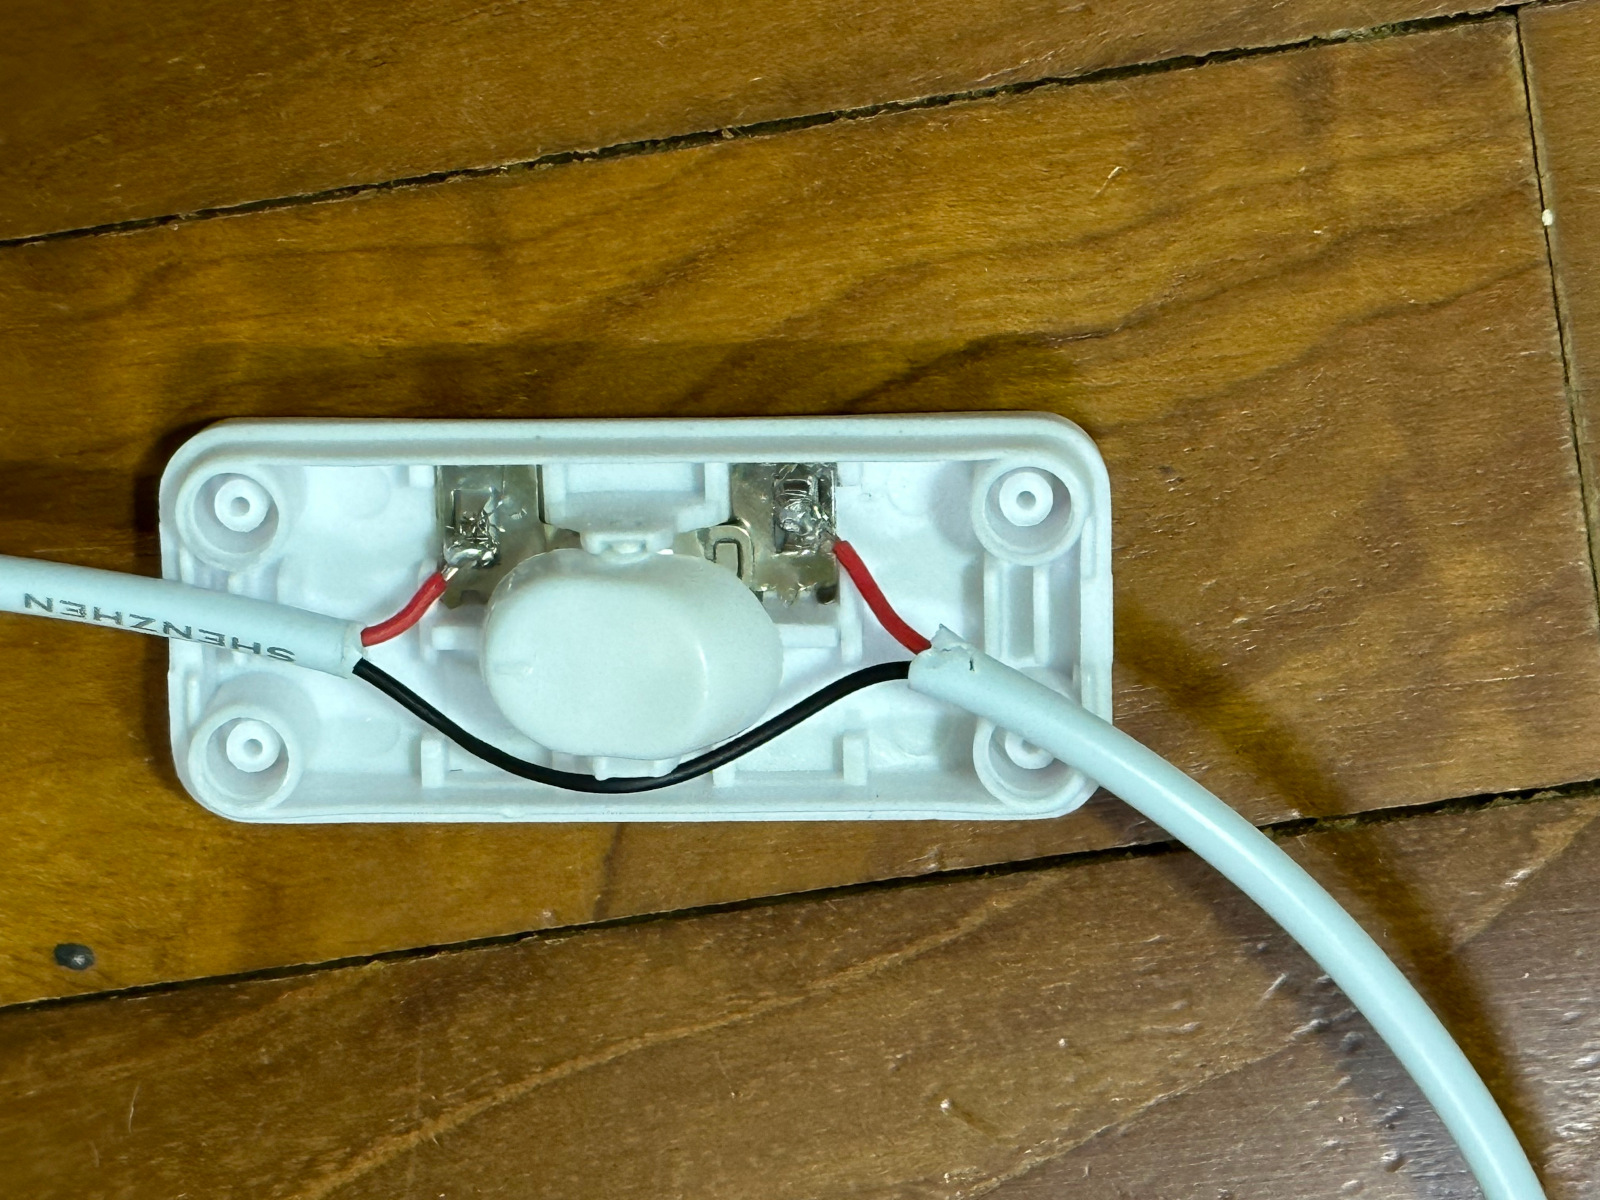 red wires coiled onto metal conductors on inline cord switch